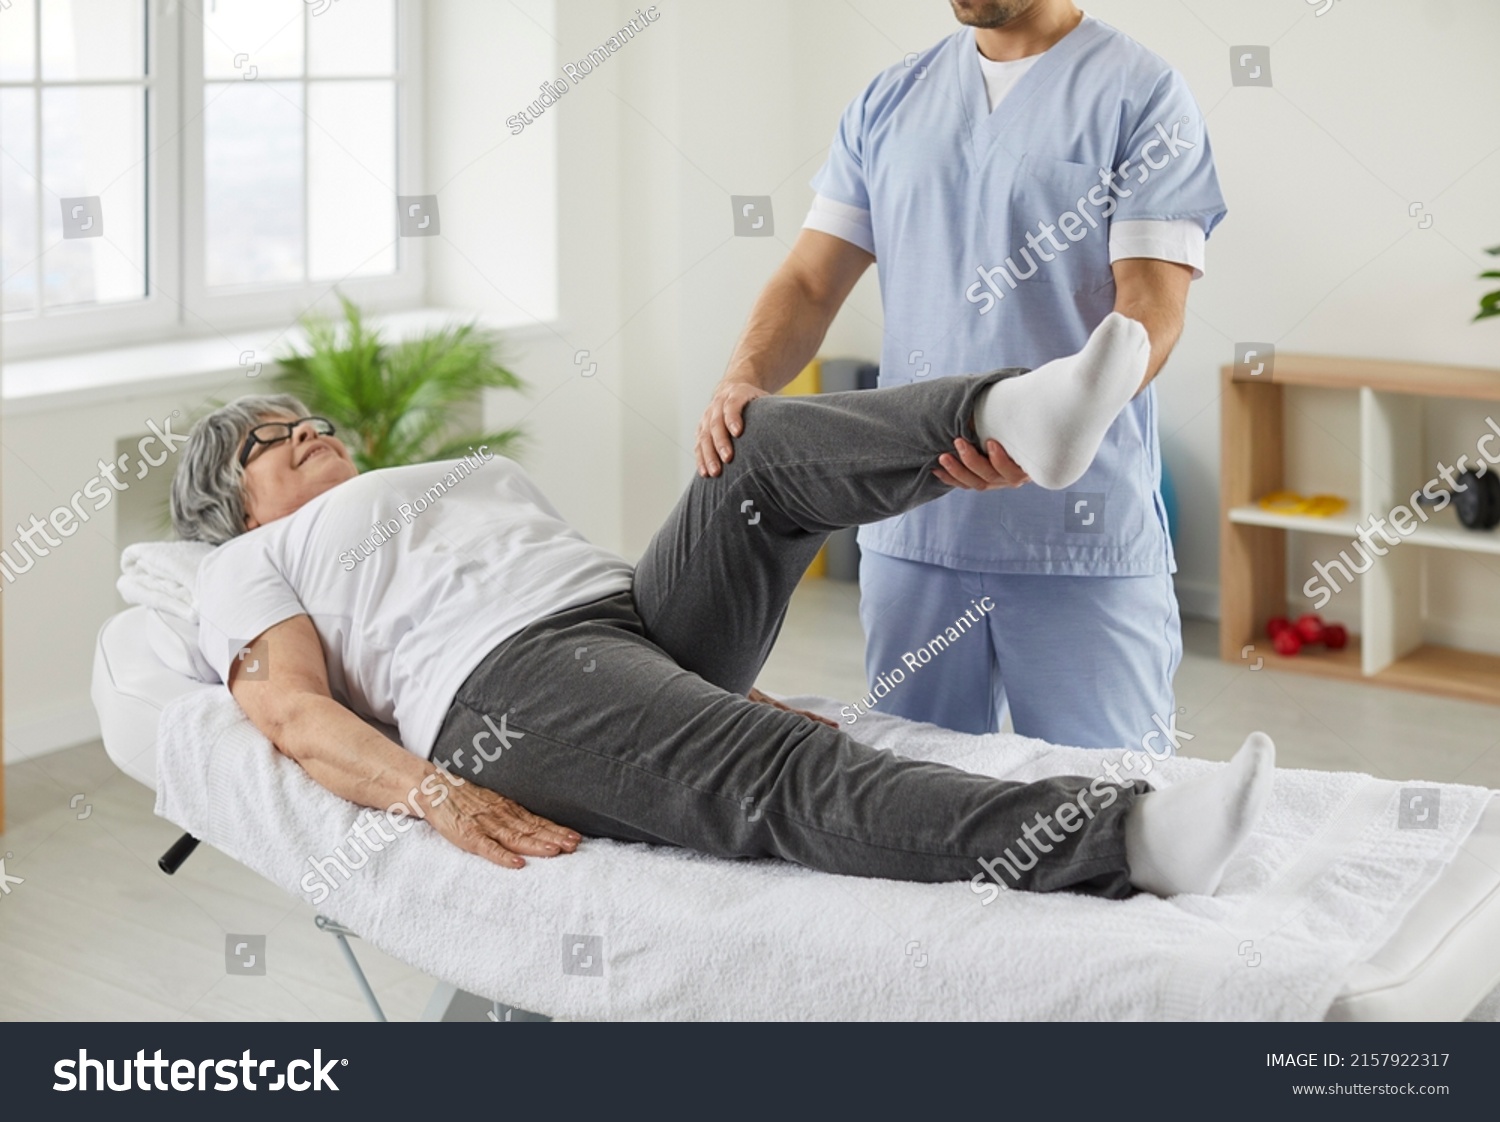 Happy senior woman lying on exam couch while chiropractor, osteopath or physiotherapy specialist is examining her leg and knee. Osteoporosis treatment, physical therapy, remedial exercise concept #2157922317